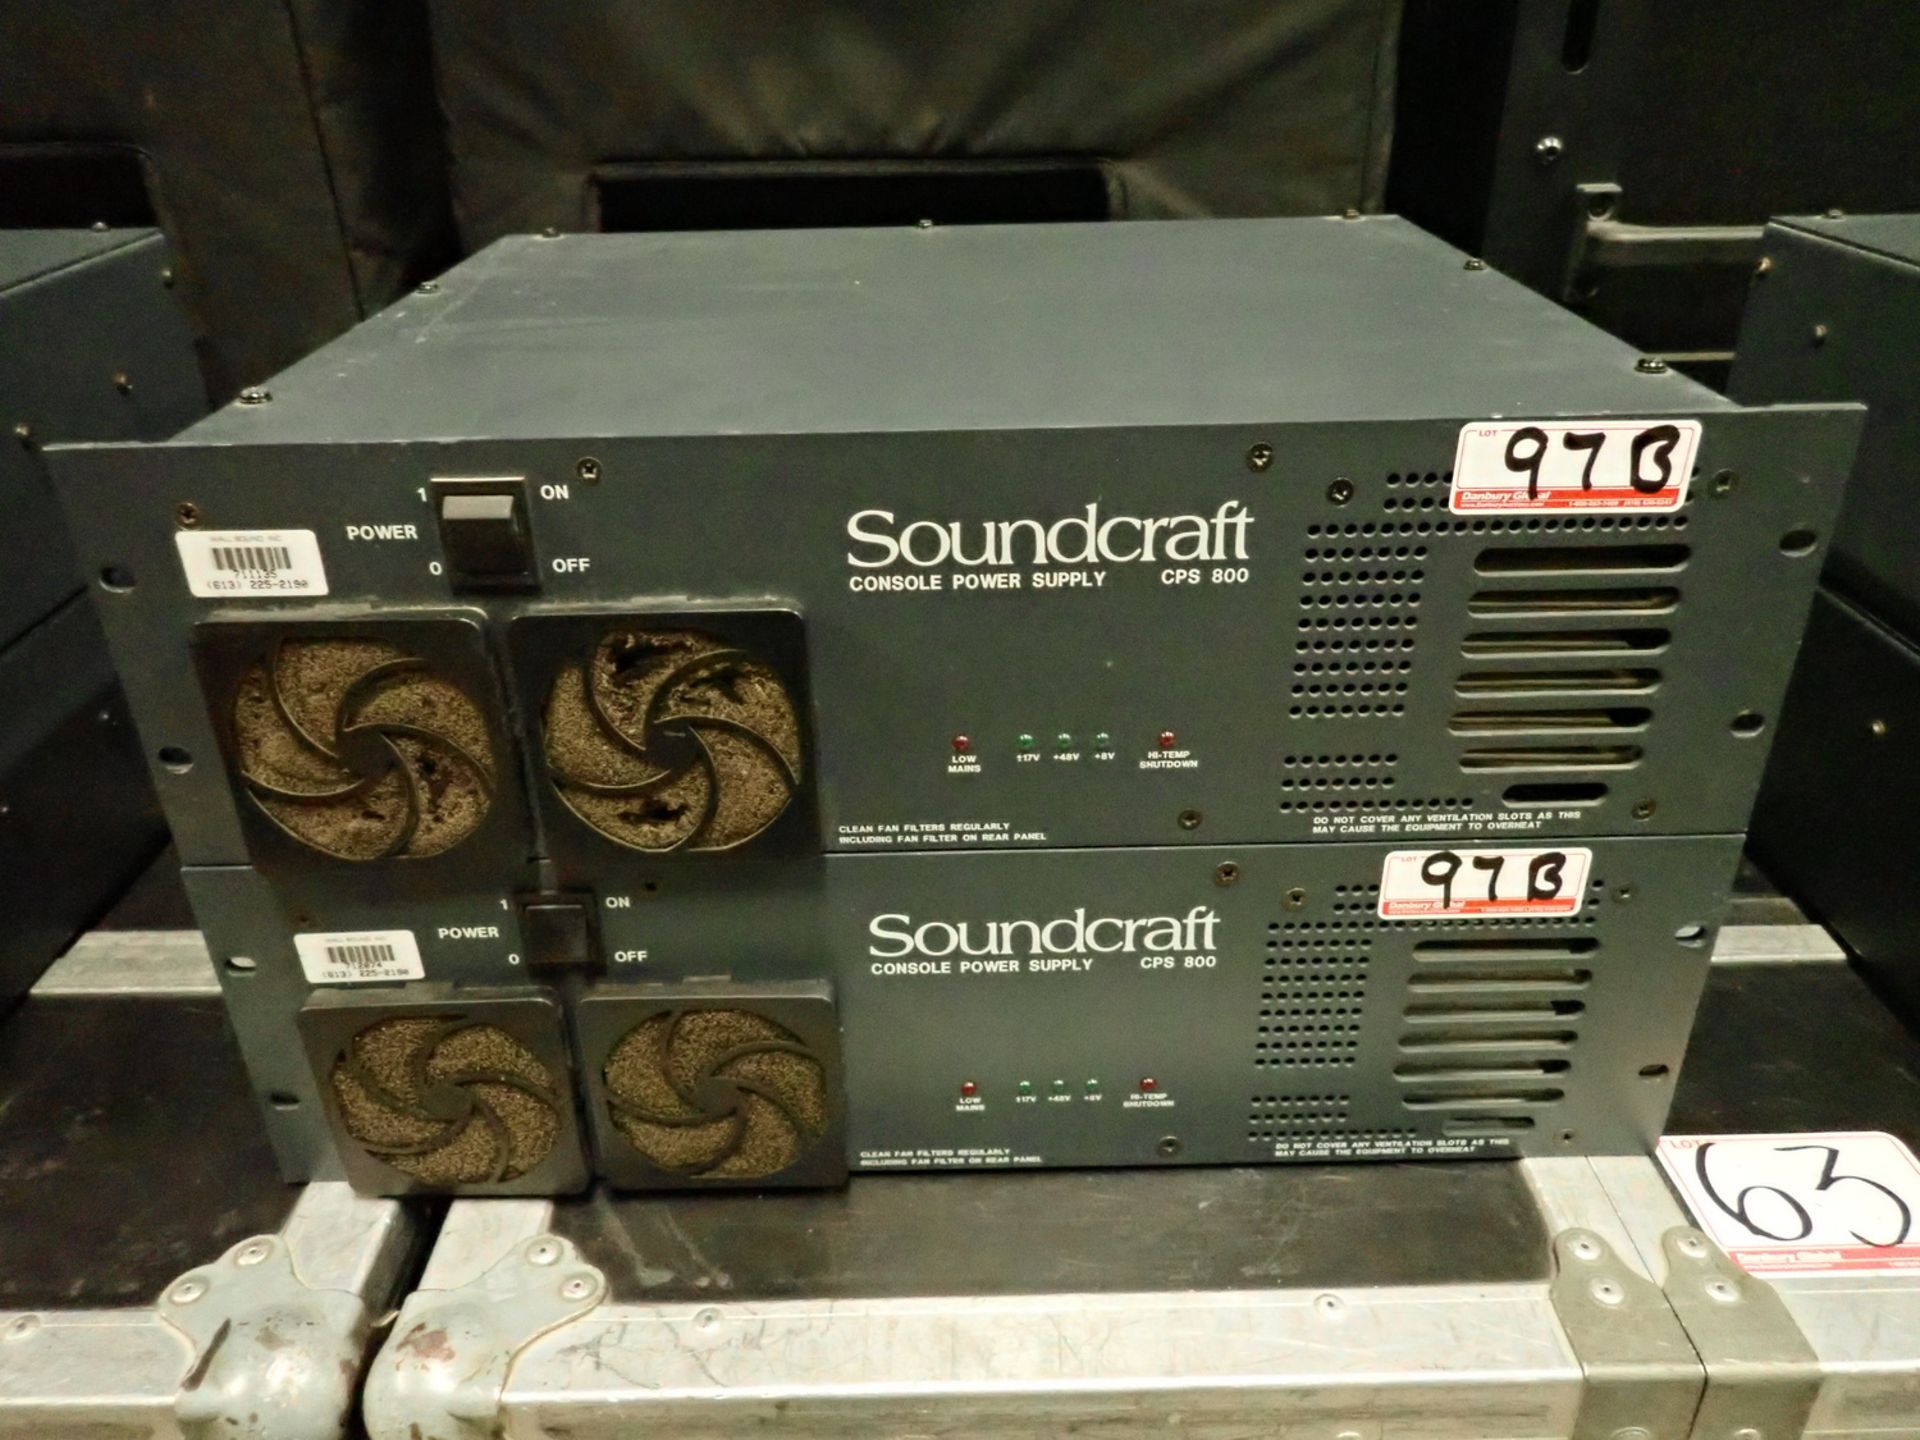 SOUND CRAFT SM20 48 X 20 MIXING CONSOLE C/W CPS 800 CONSOLE POWER SUPPLY, ROLLING HARD CASE - Image 6 of 6